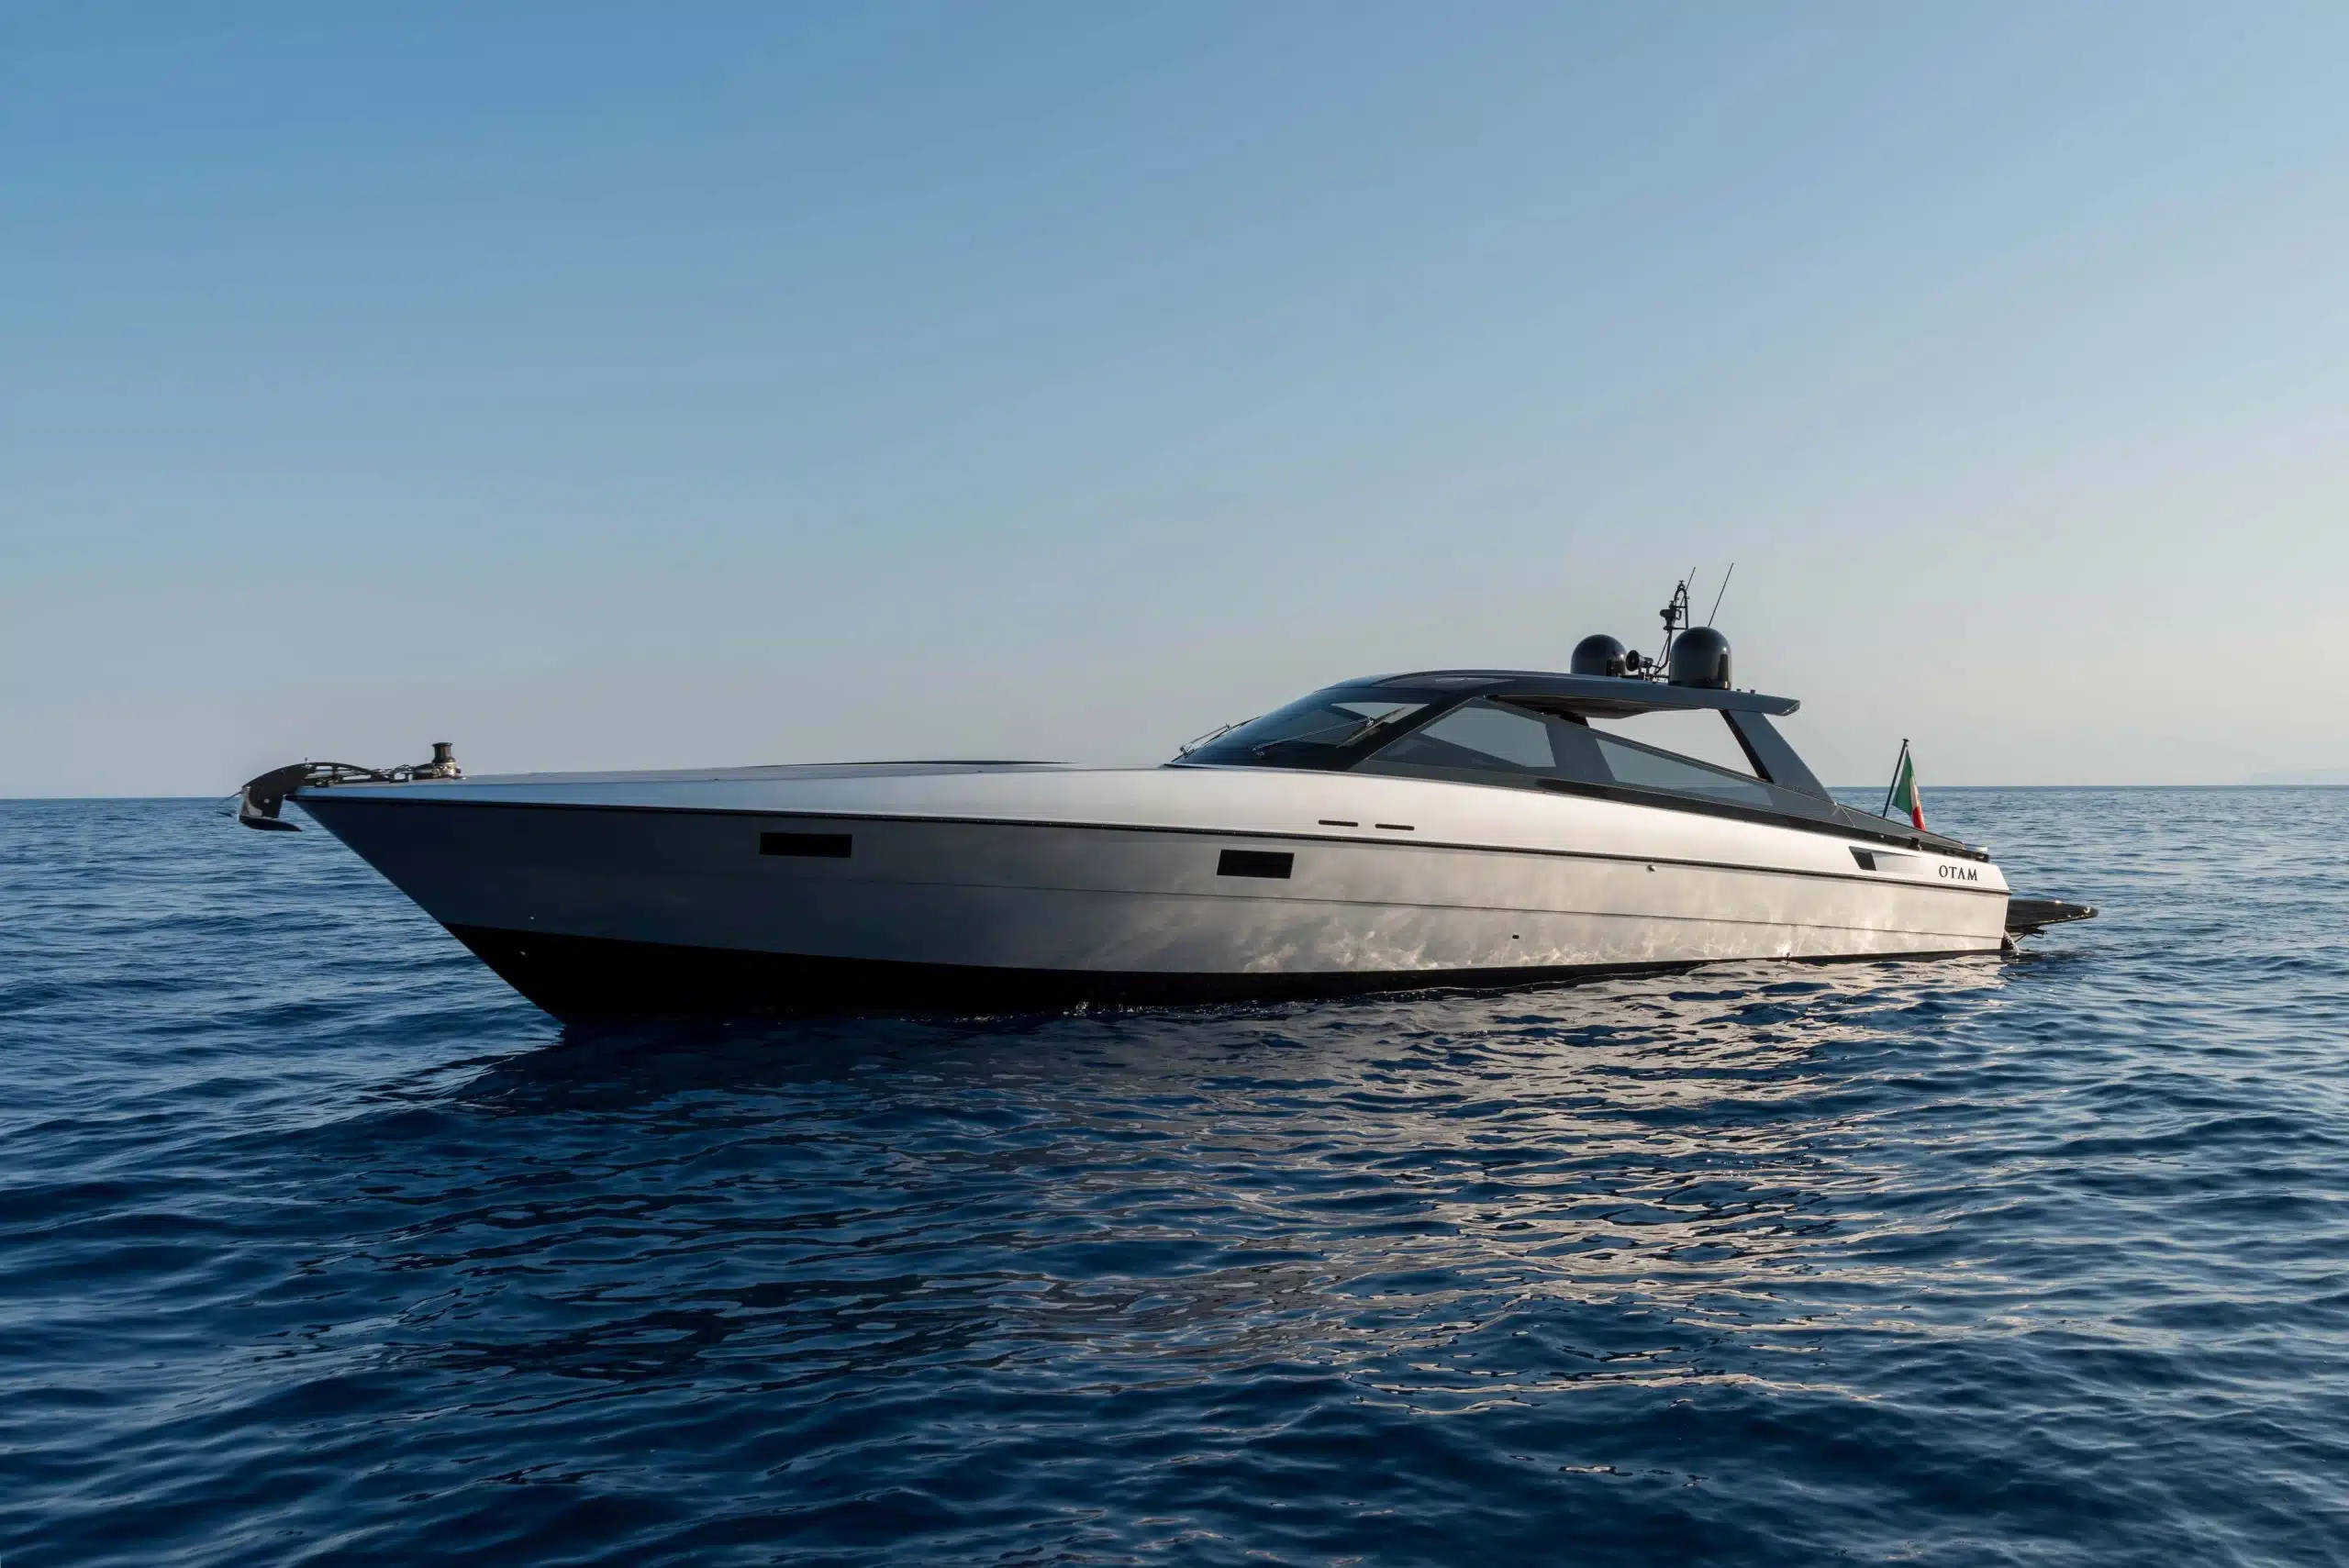 Otam 58' GTS OPEN - Iconic and a high quality Made in Italy ambassador in the Nautical industry